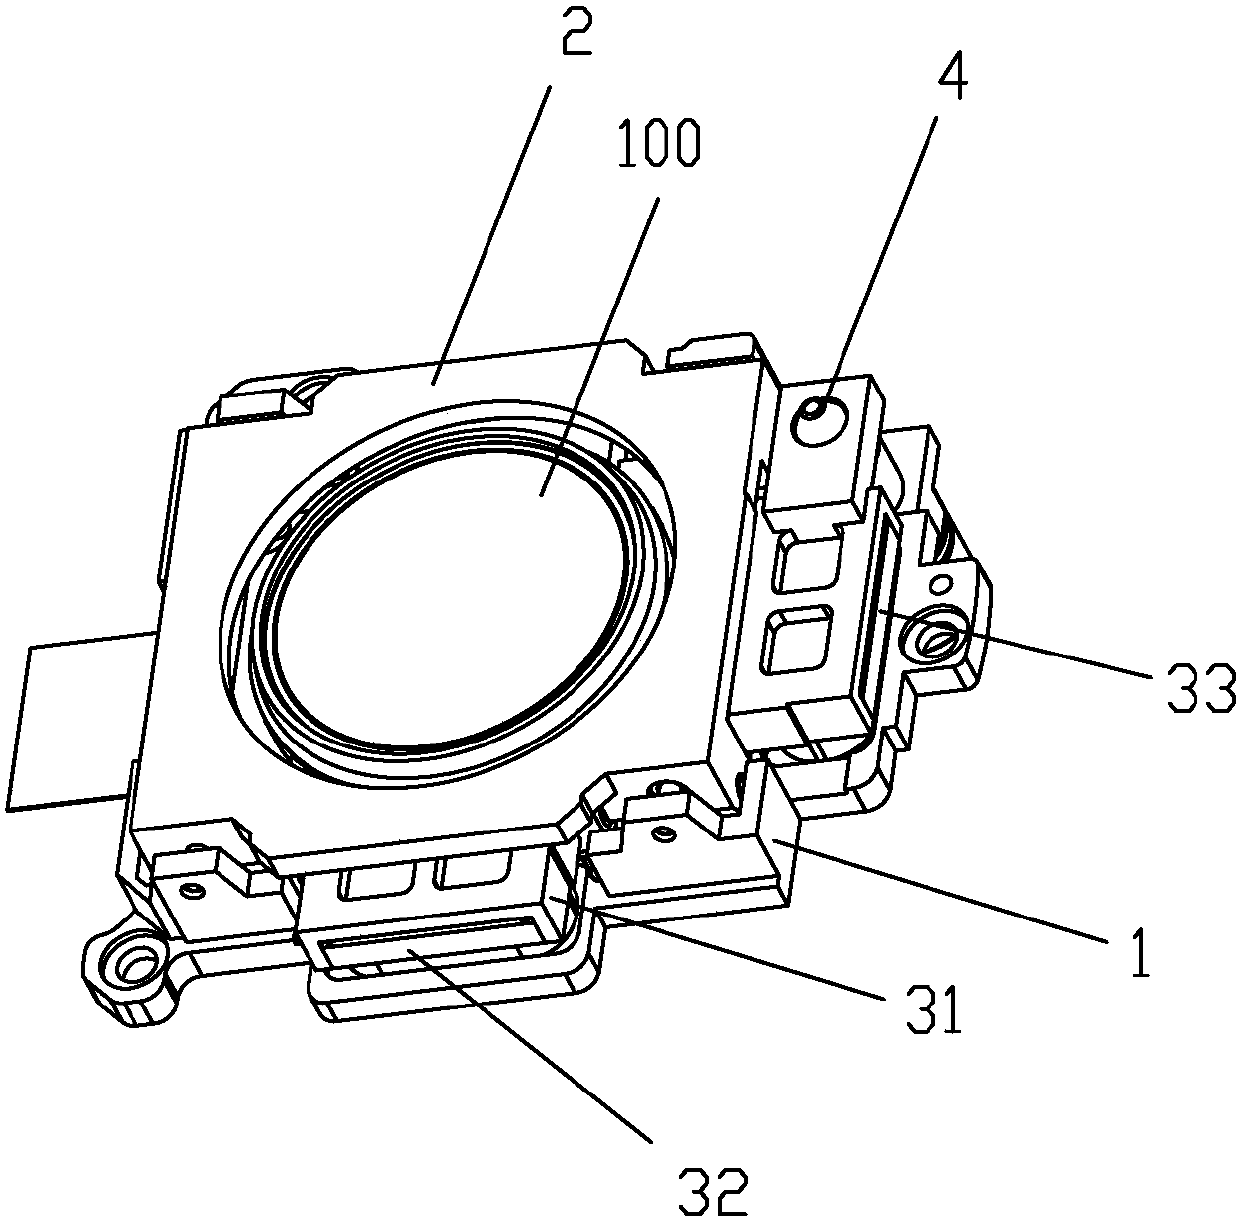 A lens anti-shake device with self-locking structure